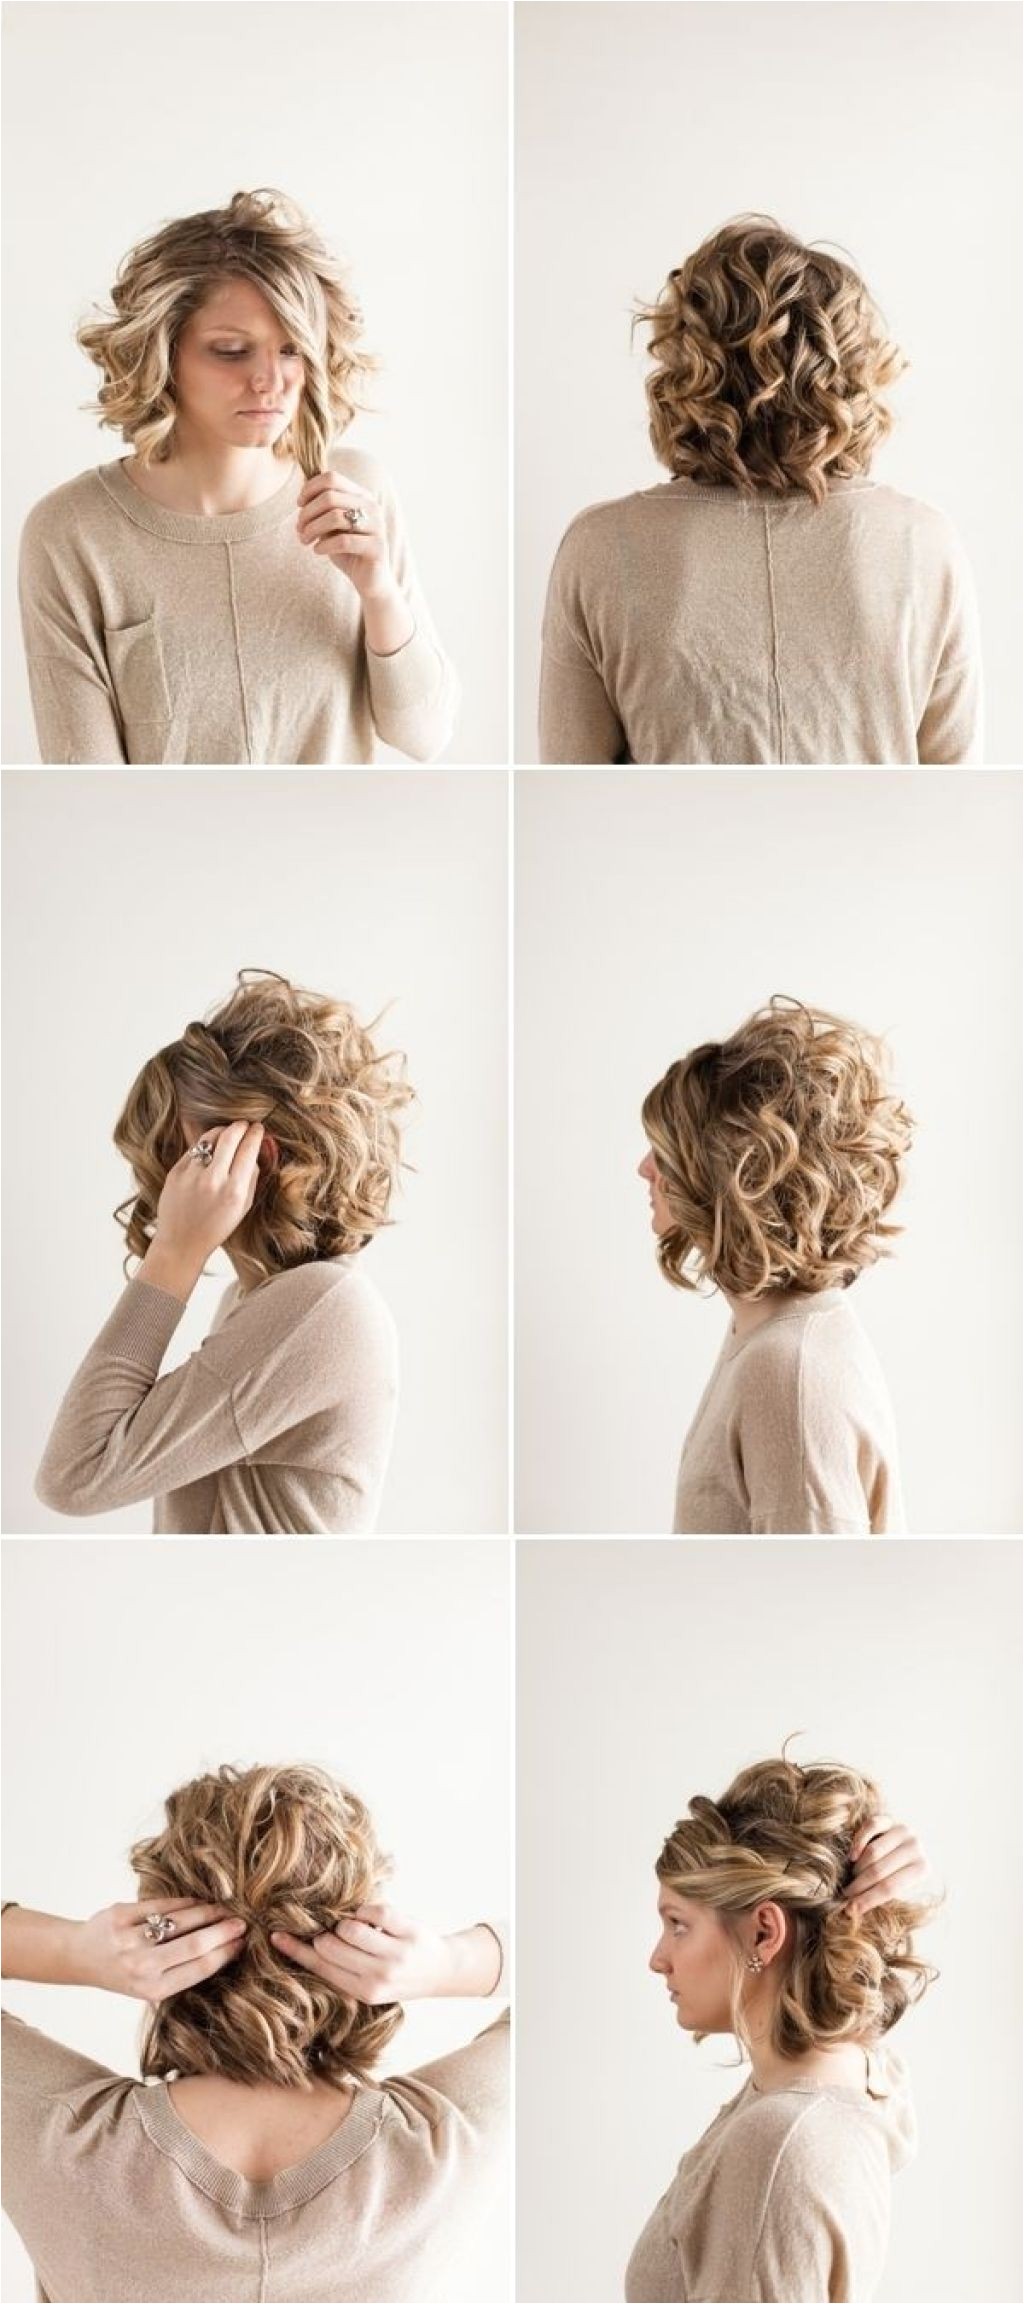 Amazing Easy Formal Updos For Curly Hair Spy Auto Cars Pict Prom Hairstyles Short Trend And